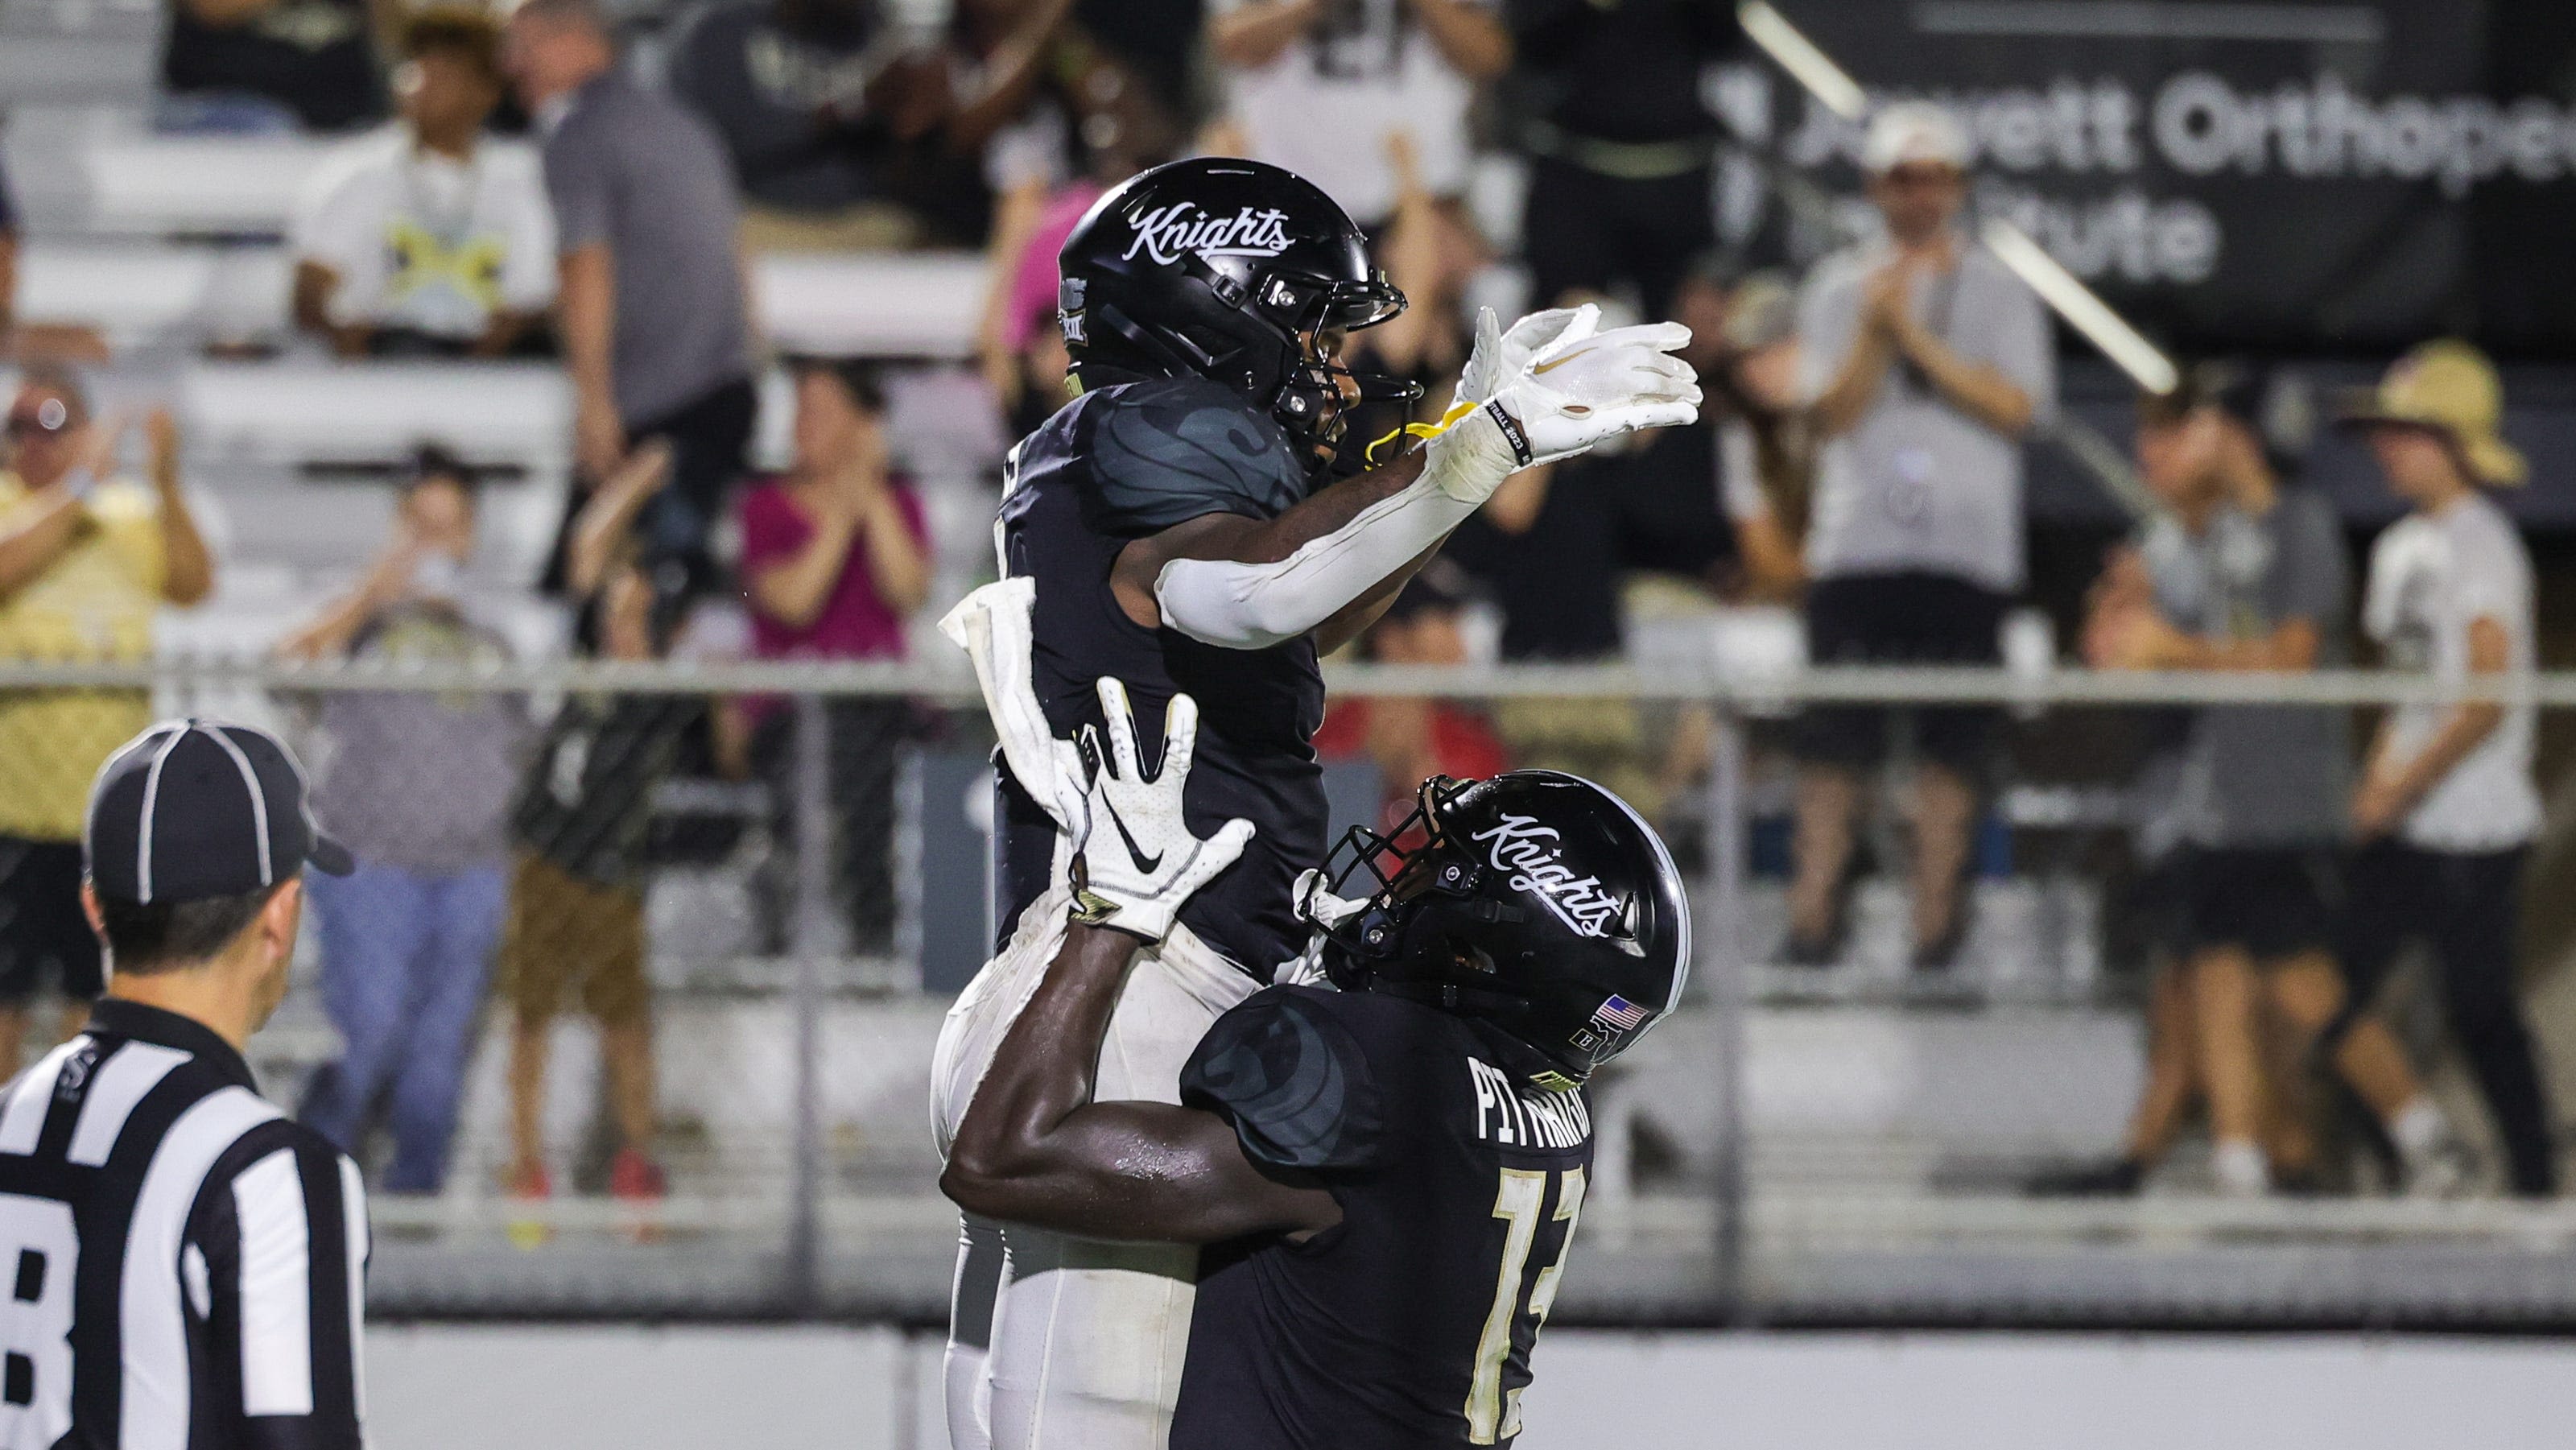 UCF football rankings in College Football 25: Full list of player and team ratings